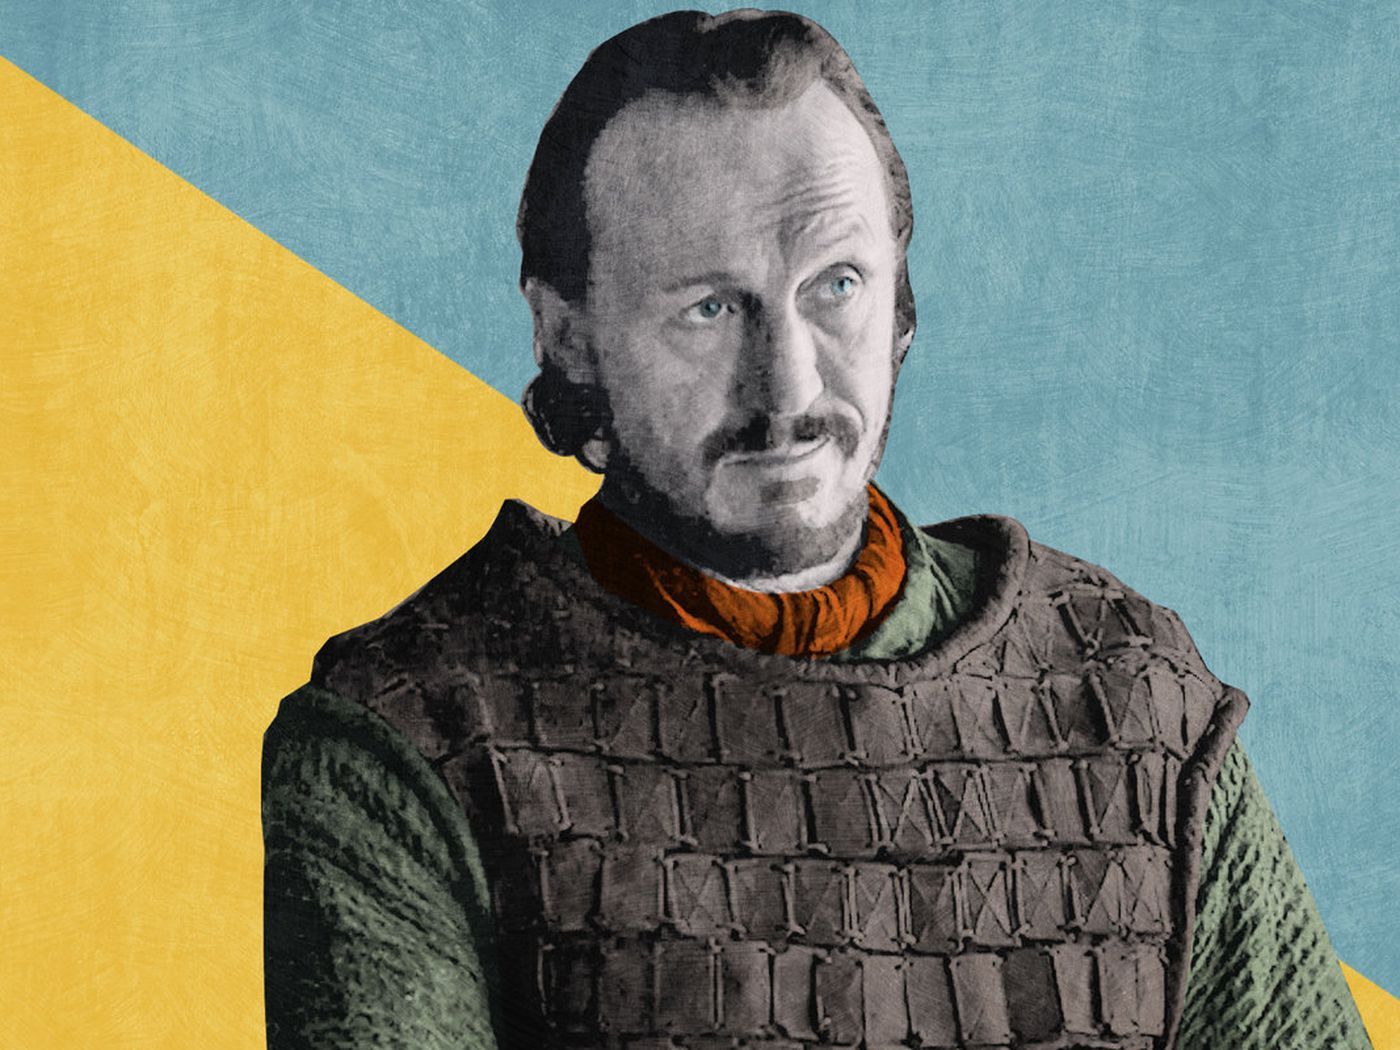 Game of Thrones' Season 8: Will Bronn Get His Girl and Castle?